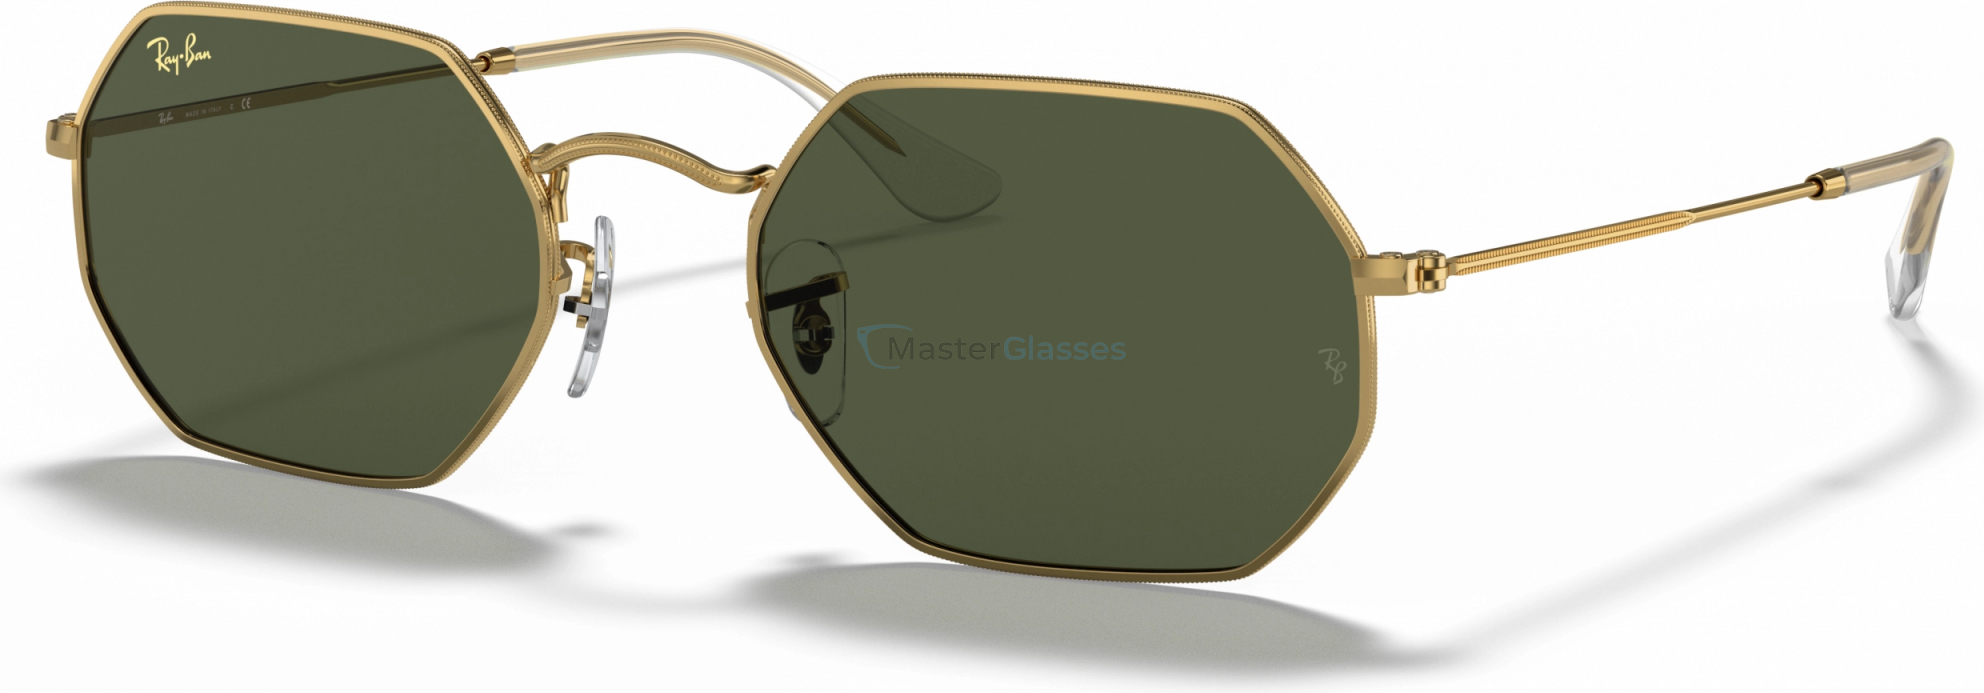   Ray-Ban RB3556 919631 Gold Legend